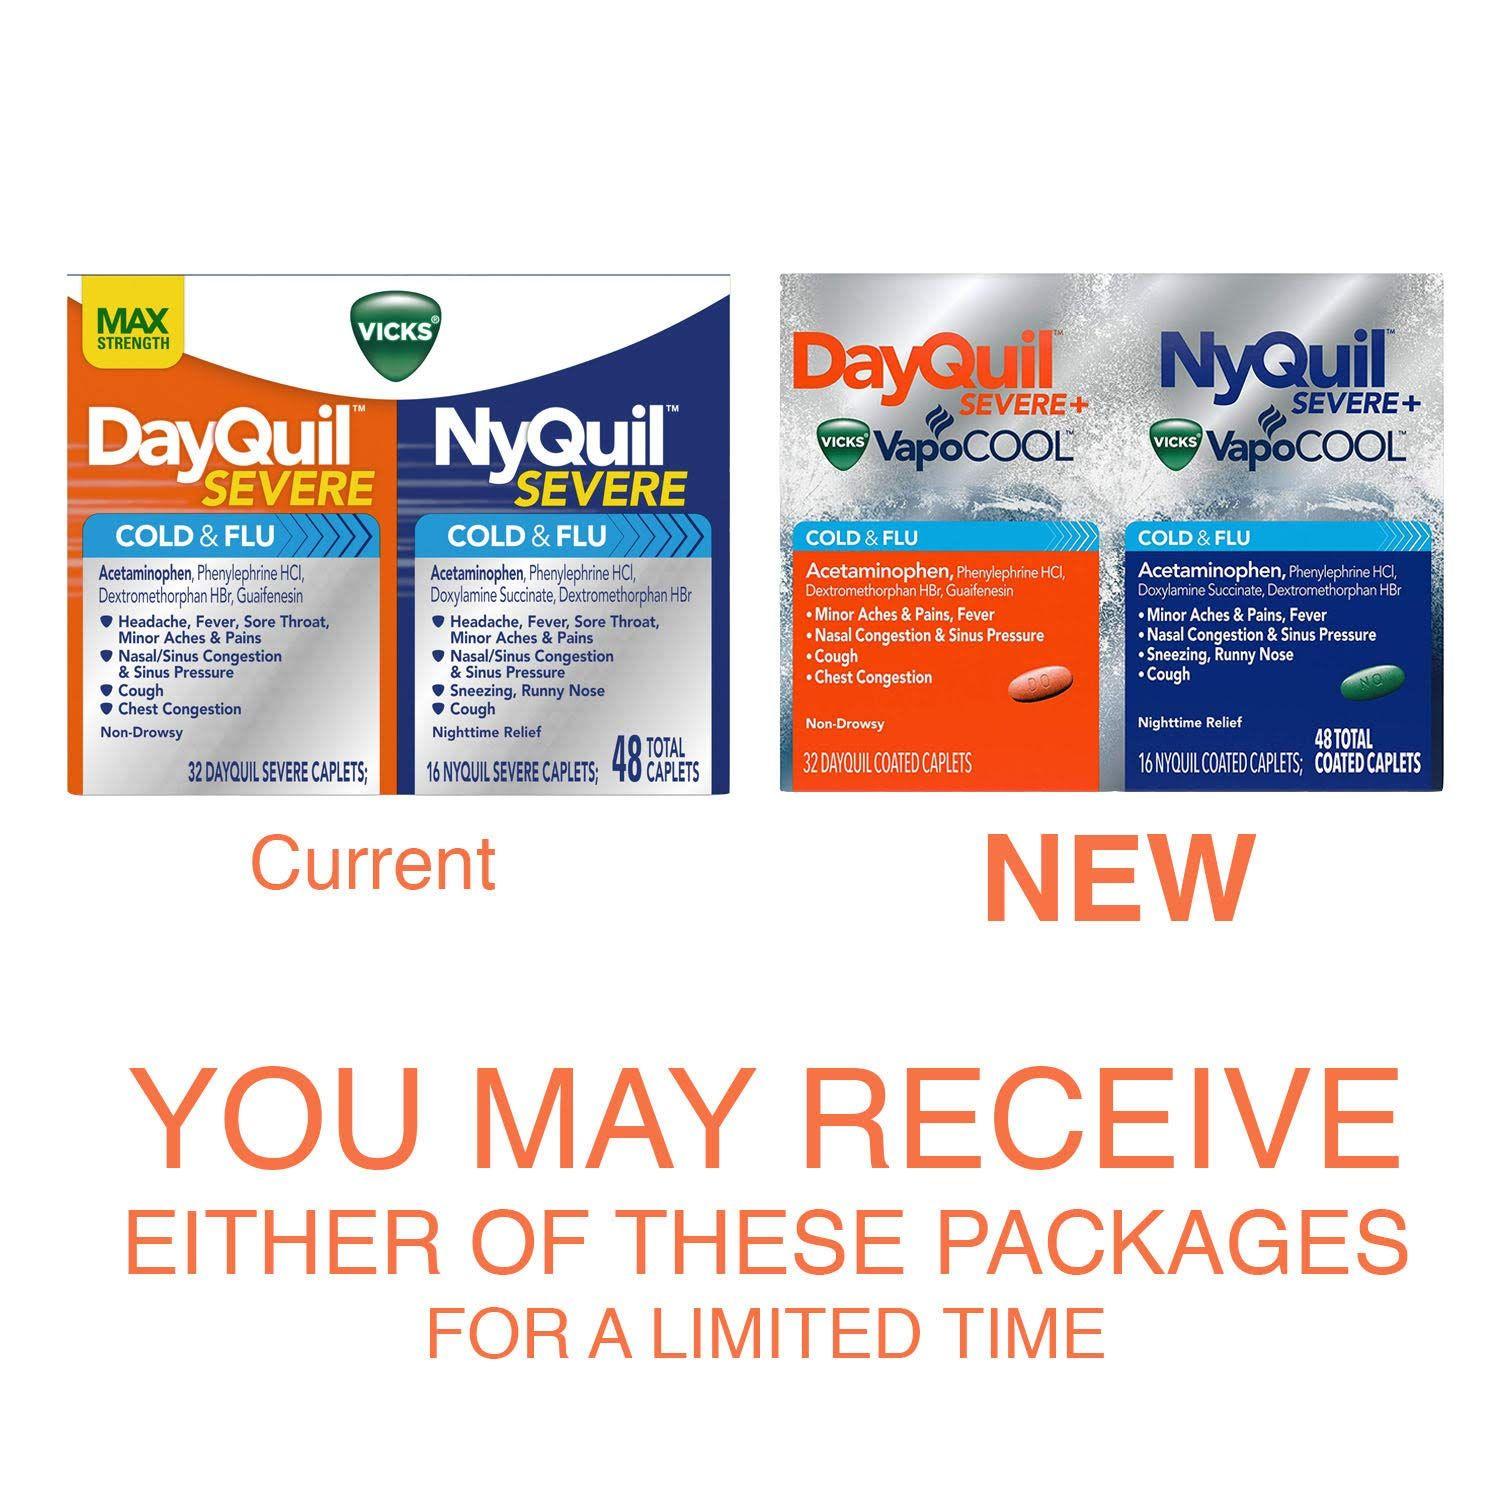 Dayquil Logo - Amazon.com: DayQuil and NyQuil SEVERE with Vicks VapoCOOL Cough ...